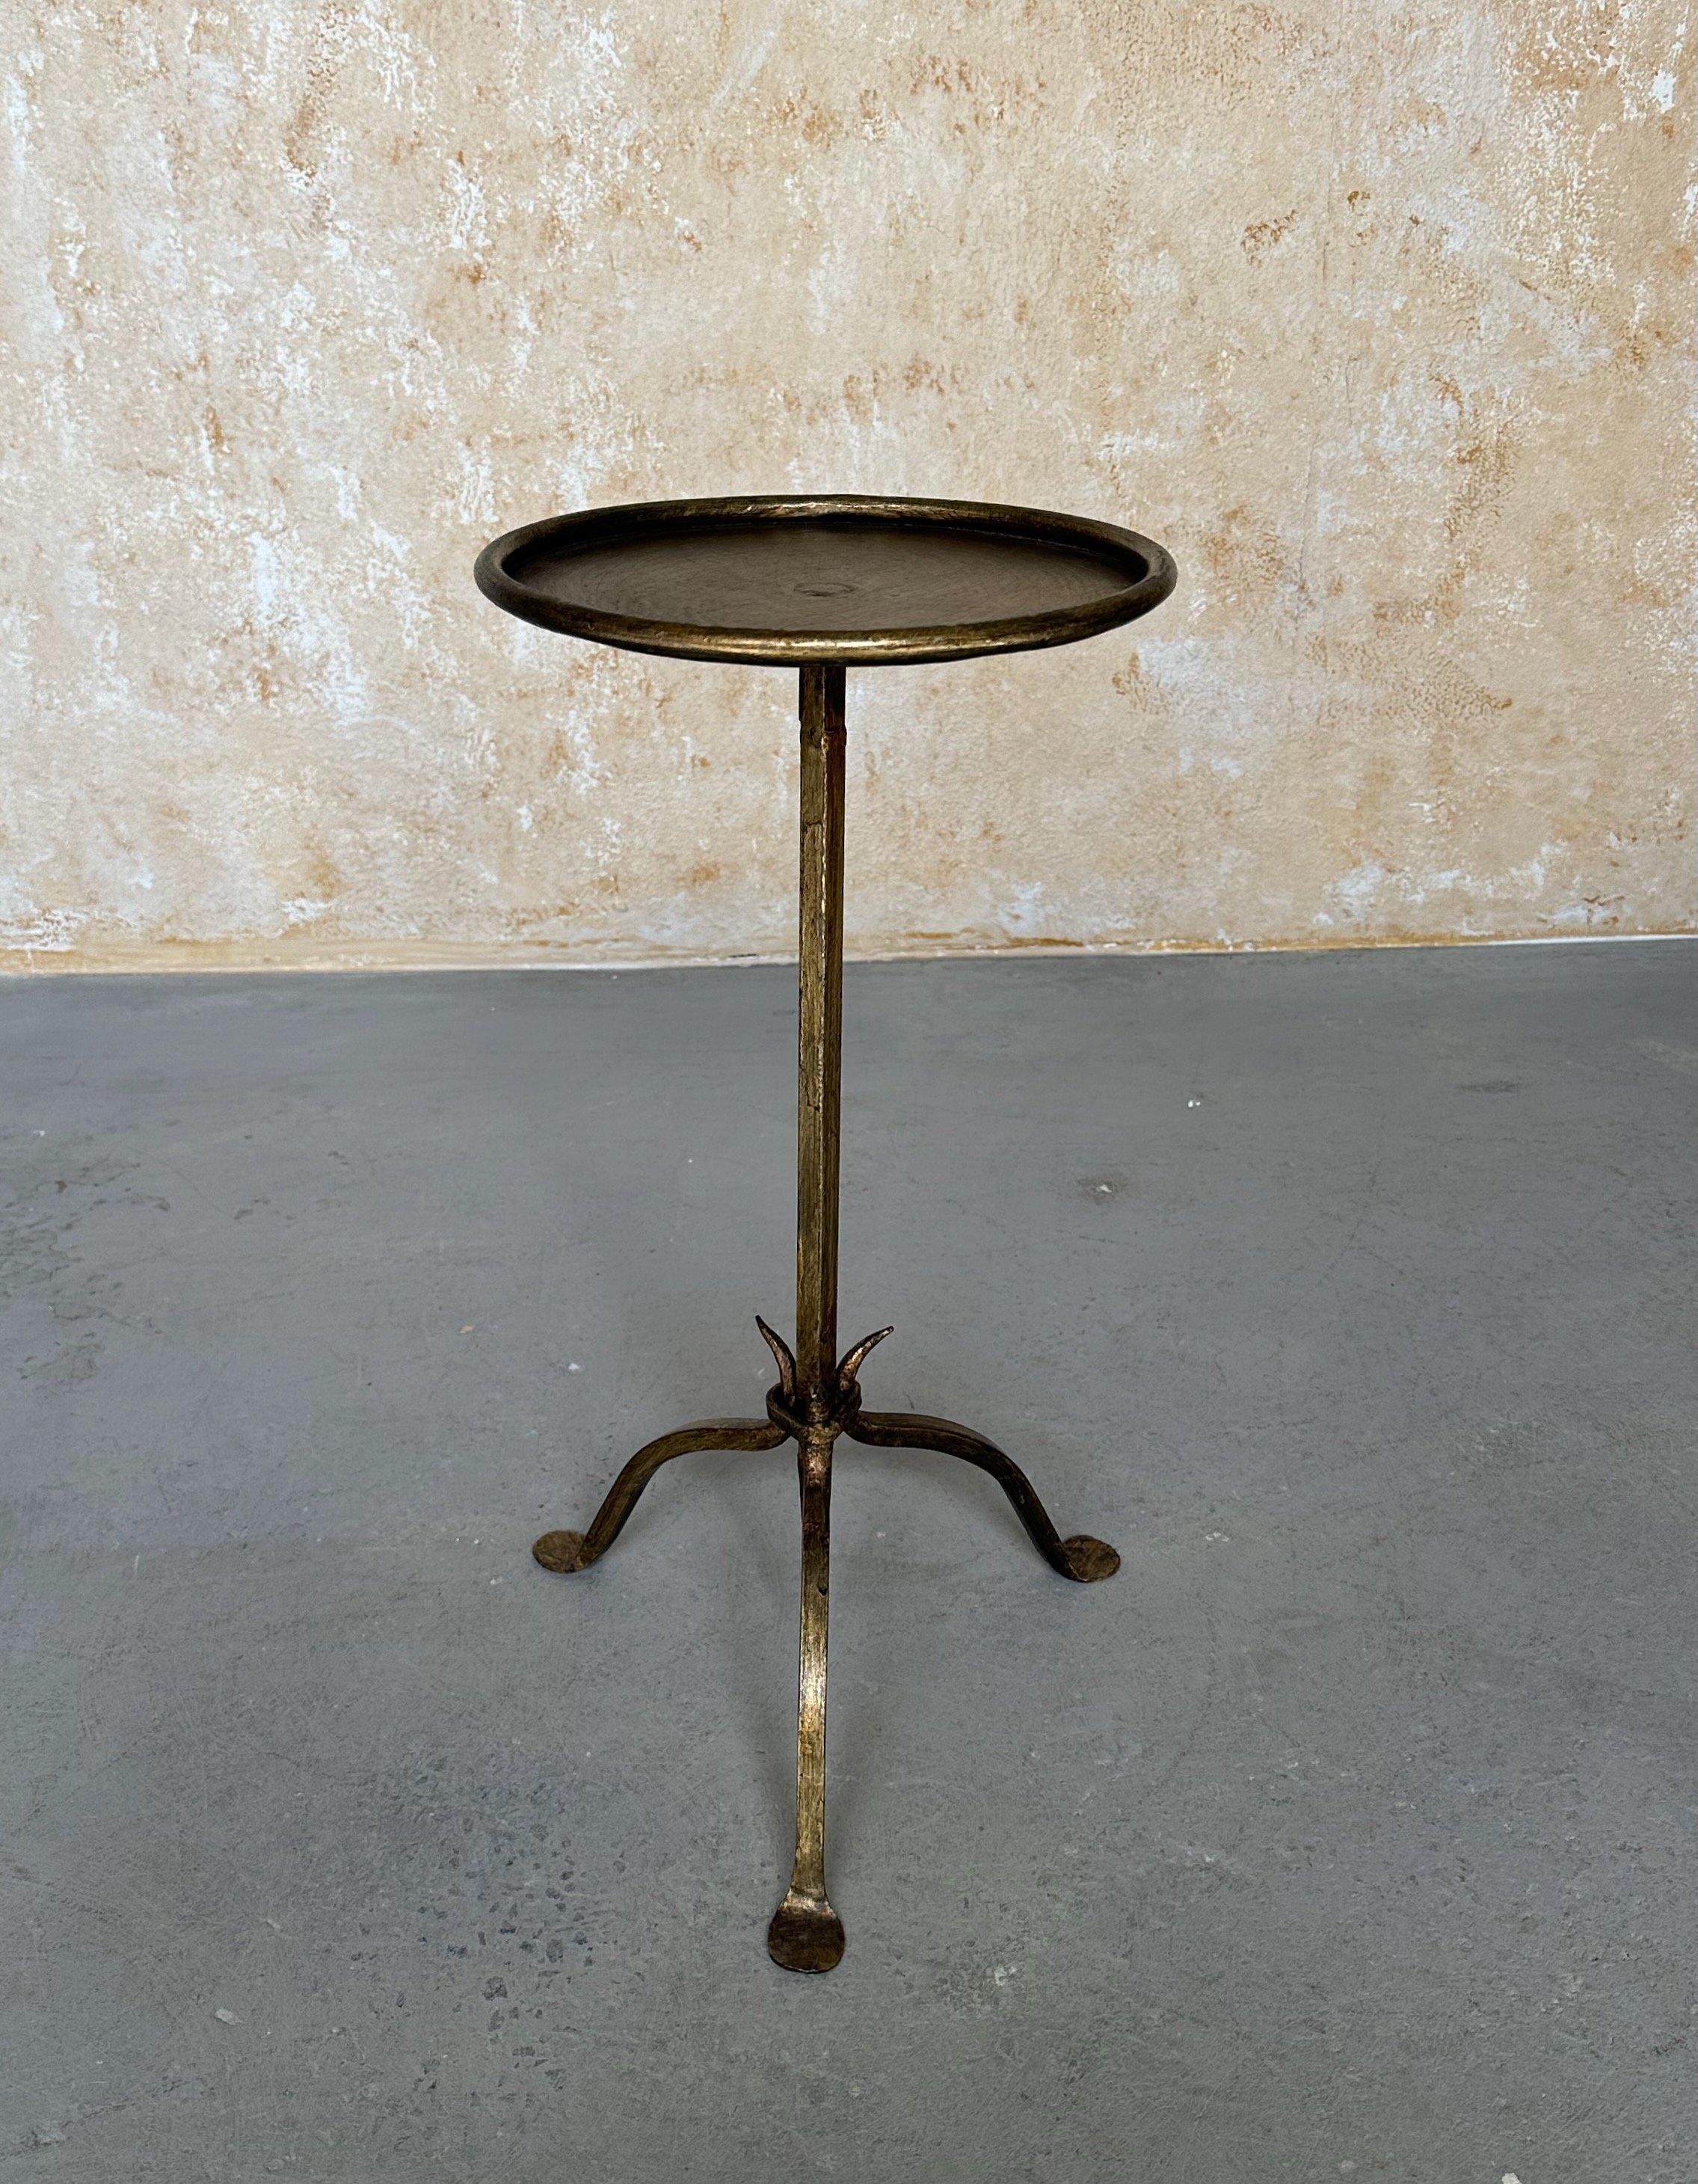 This recently fabricated Spanish iron side table has a hand-applied gold patina that replicates the same patina that you would find on a vintage piece. Created by accomplished artisans using traditional iron-working methods, the table features a